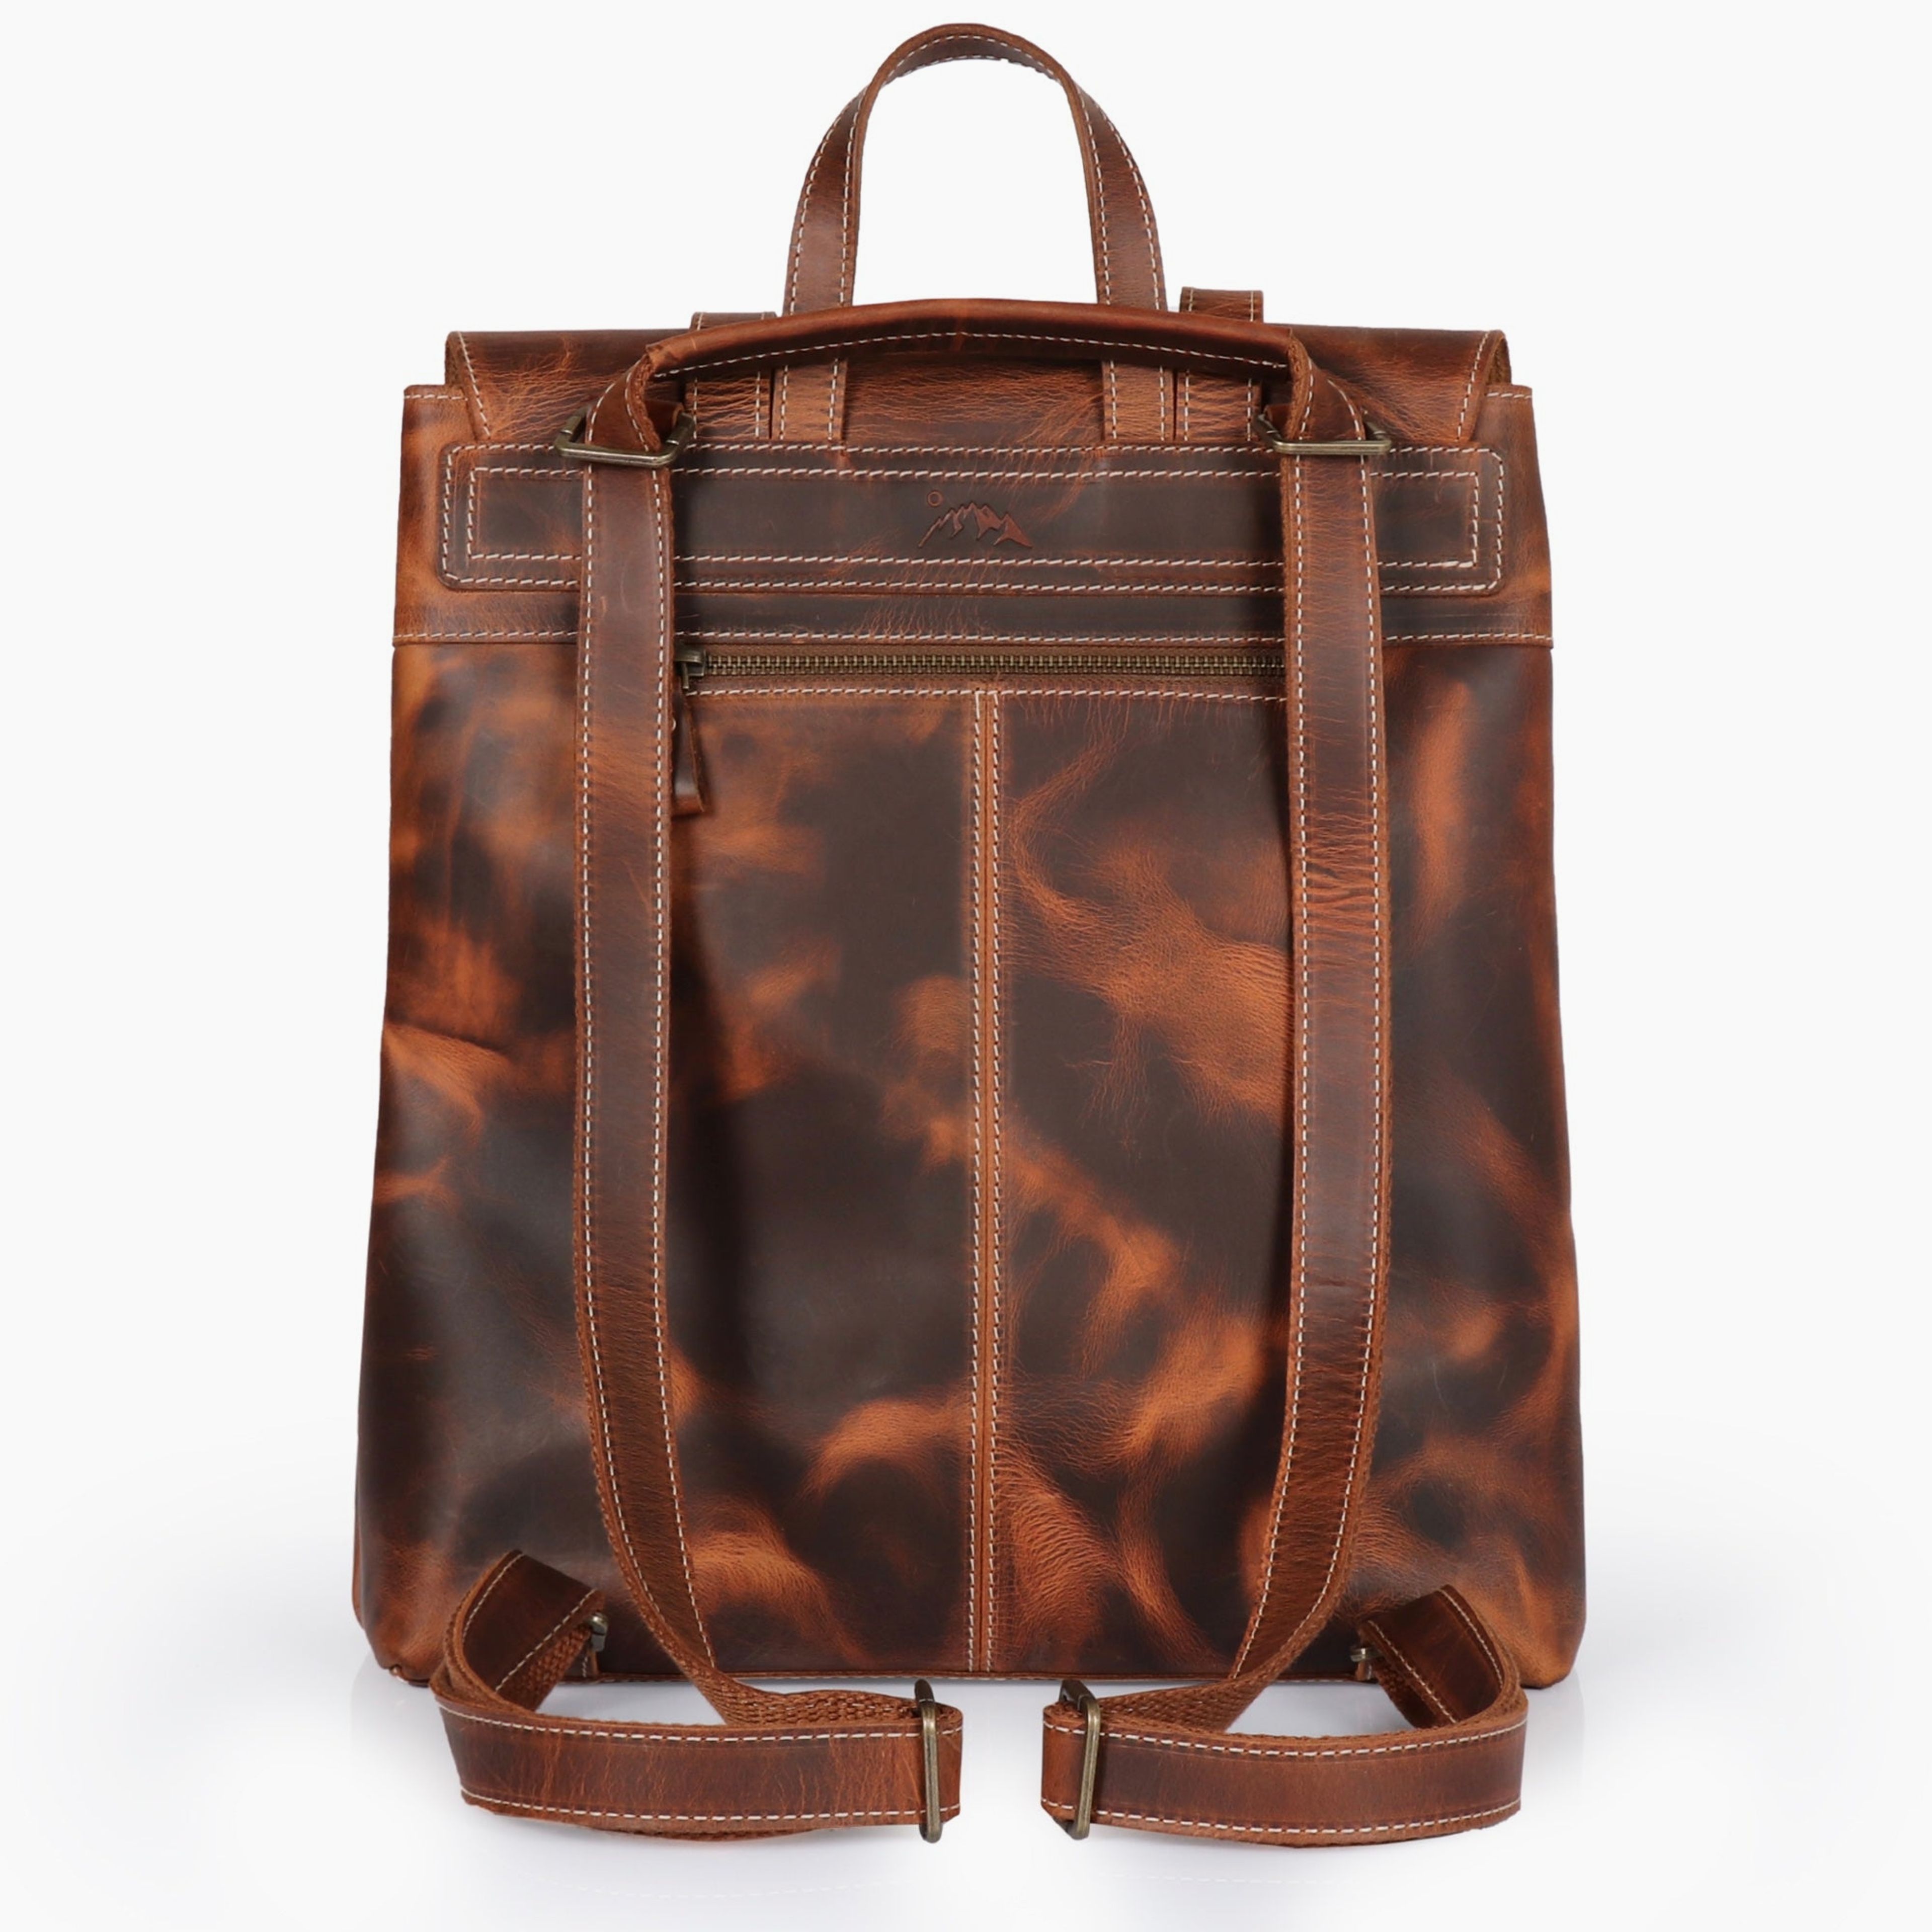 Hinton Leather Backpack